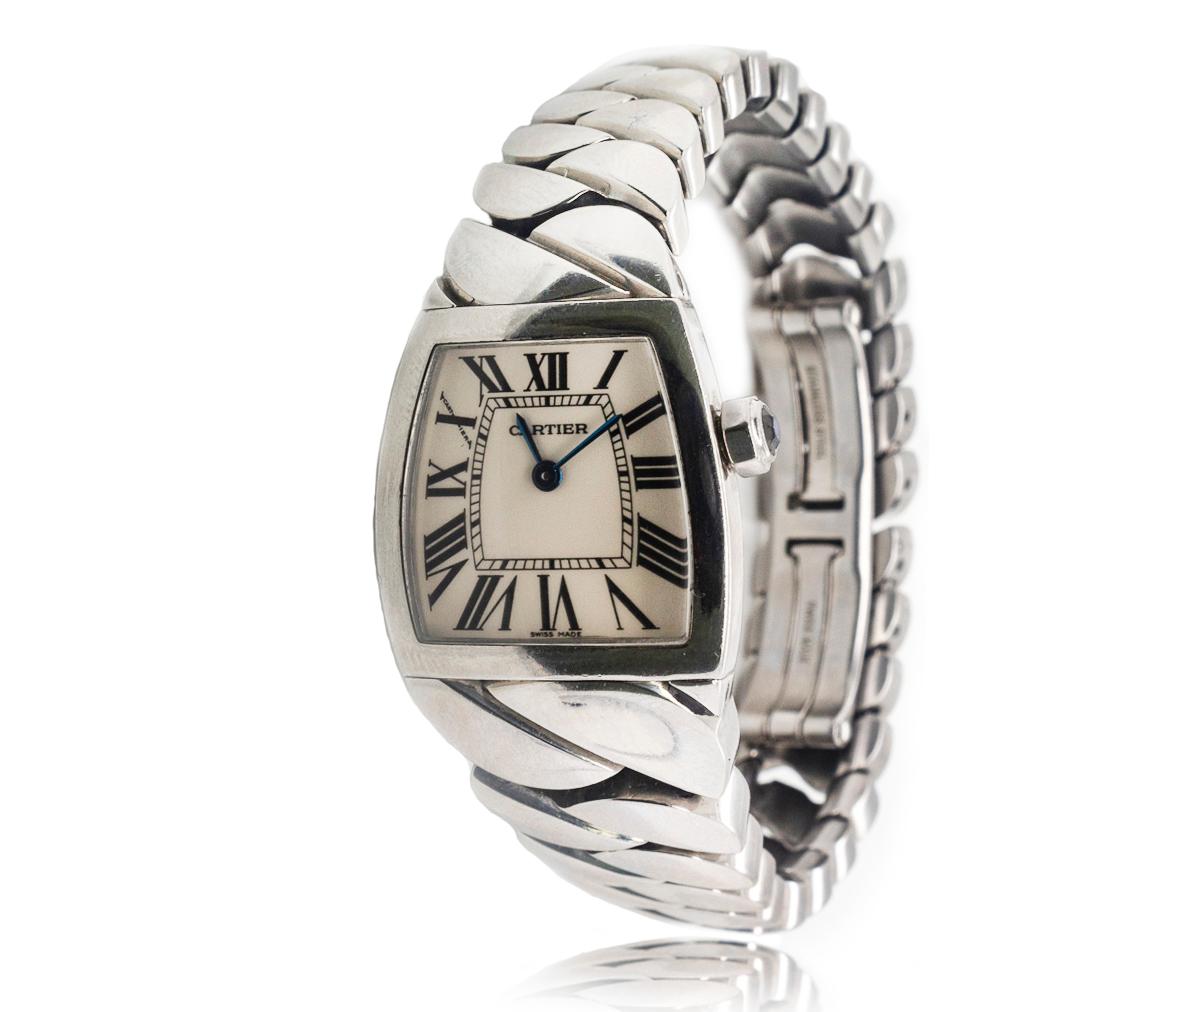 Cartier La Dona Stainless Steel Watch 202729 LX 2902
Water resistance. Swiss made
Very good preowned condition
Light scratch on band and body but we will polish off before shipping.
Measures 6.5 inches inner circumference